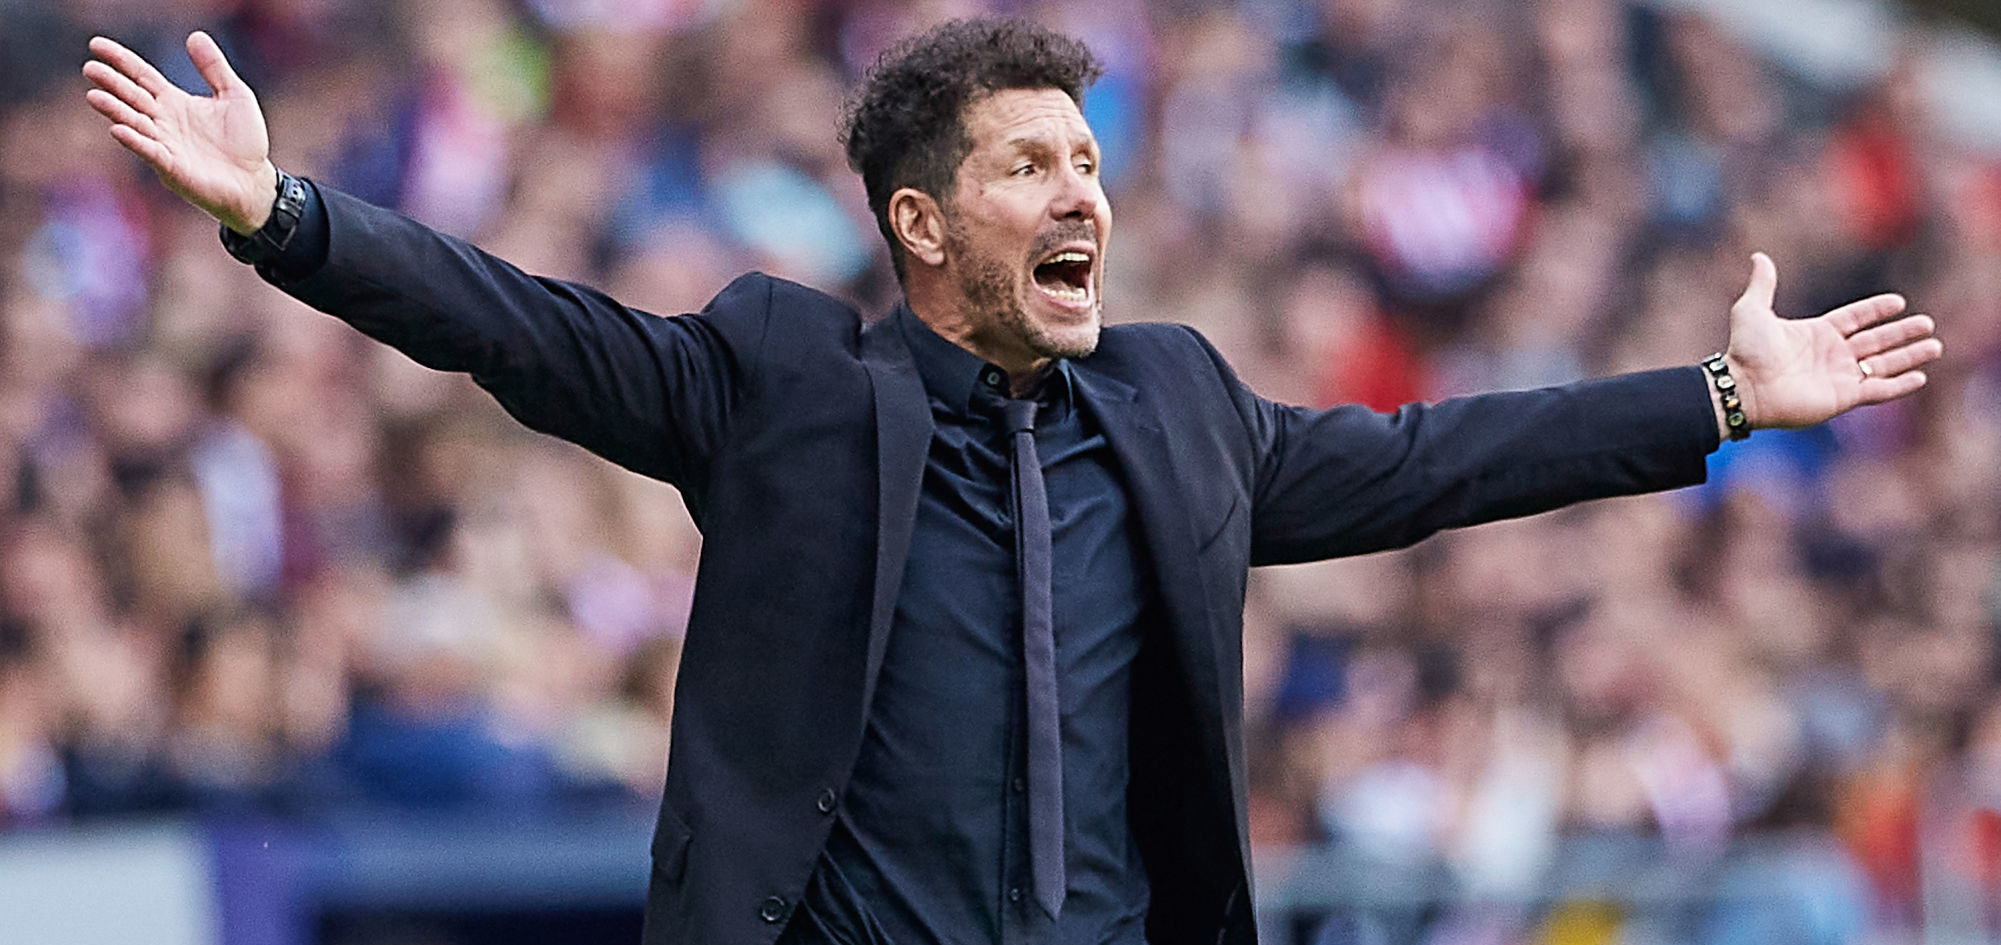 Atlético Madrid trainer Diego Simeone is gesturing during an UEFA Champions League game